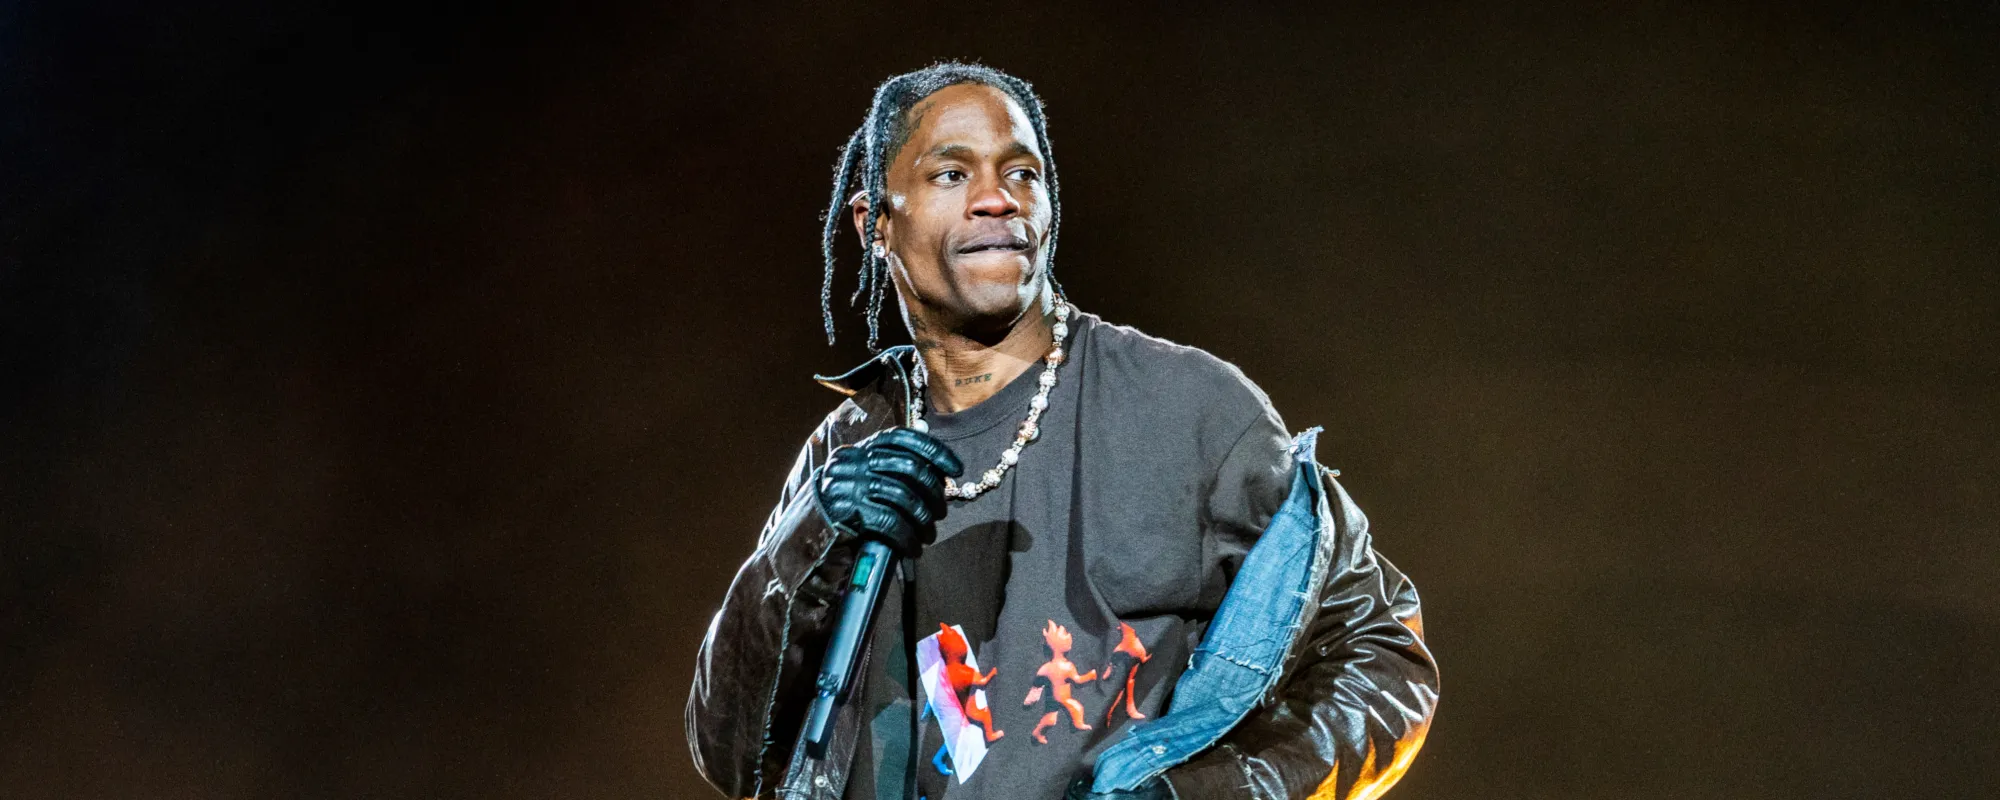 Travis Scott Collab with Dior is Paused Indefinitely